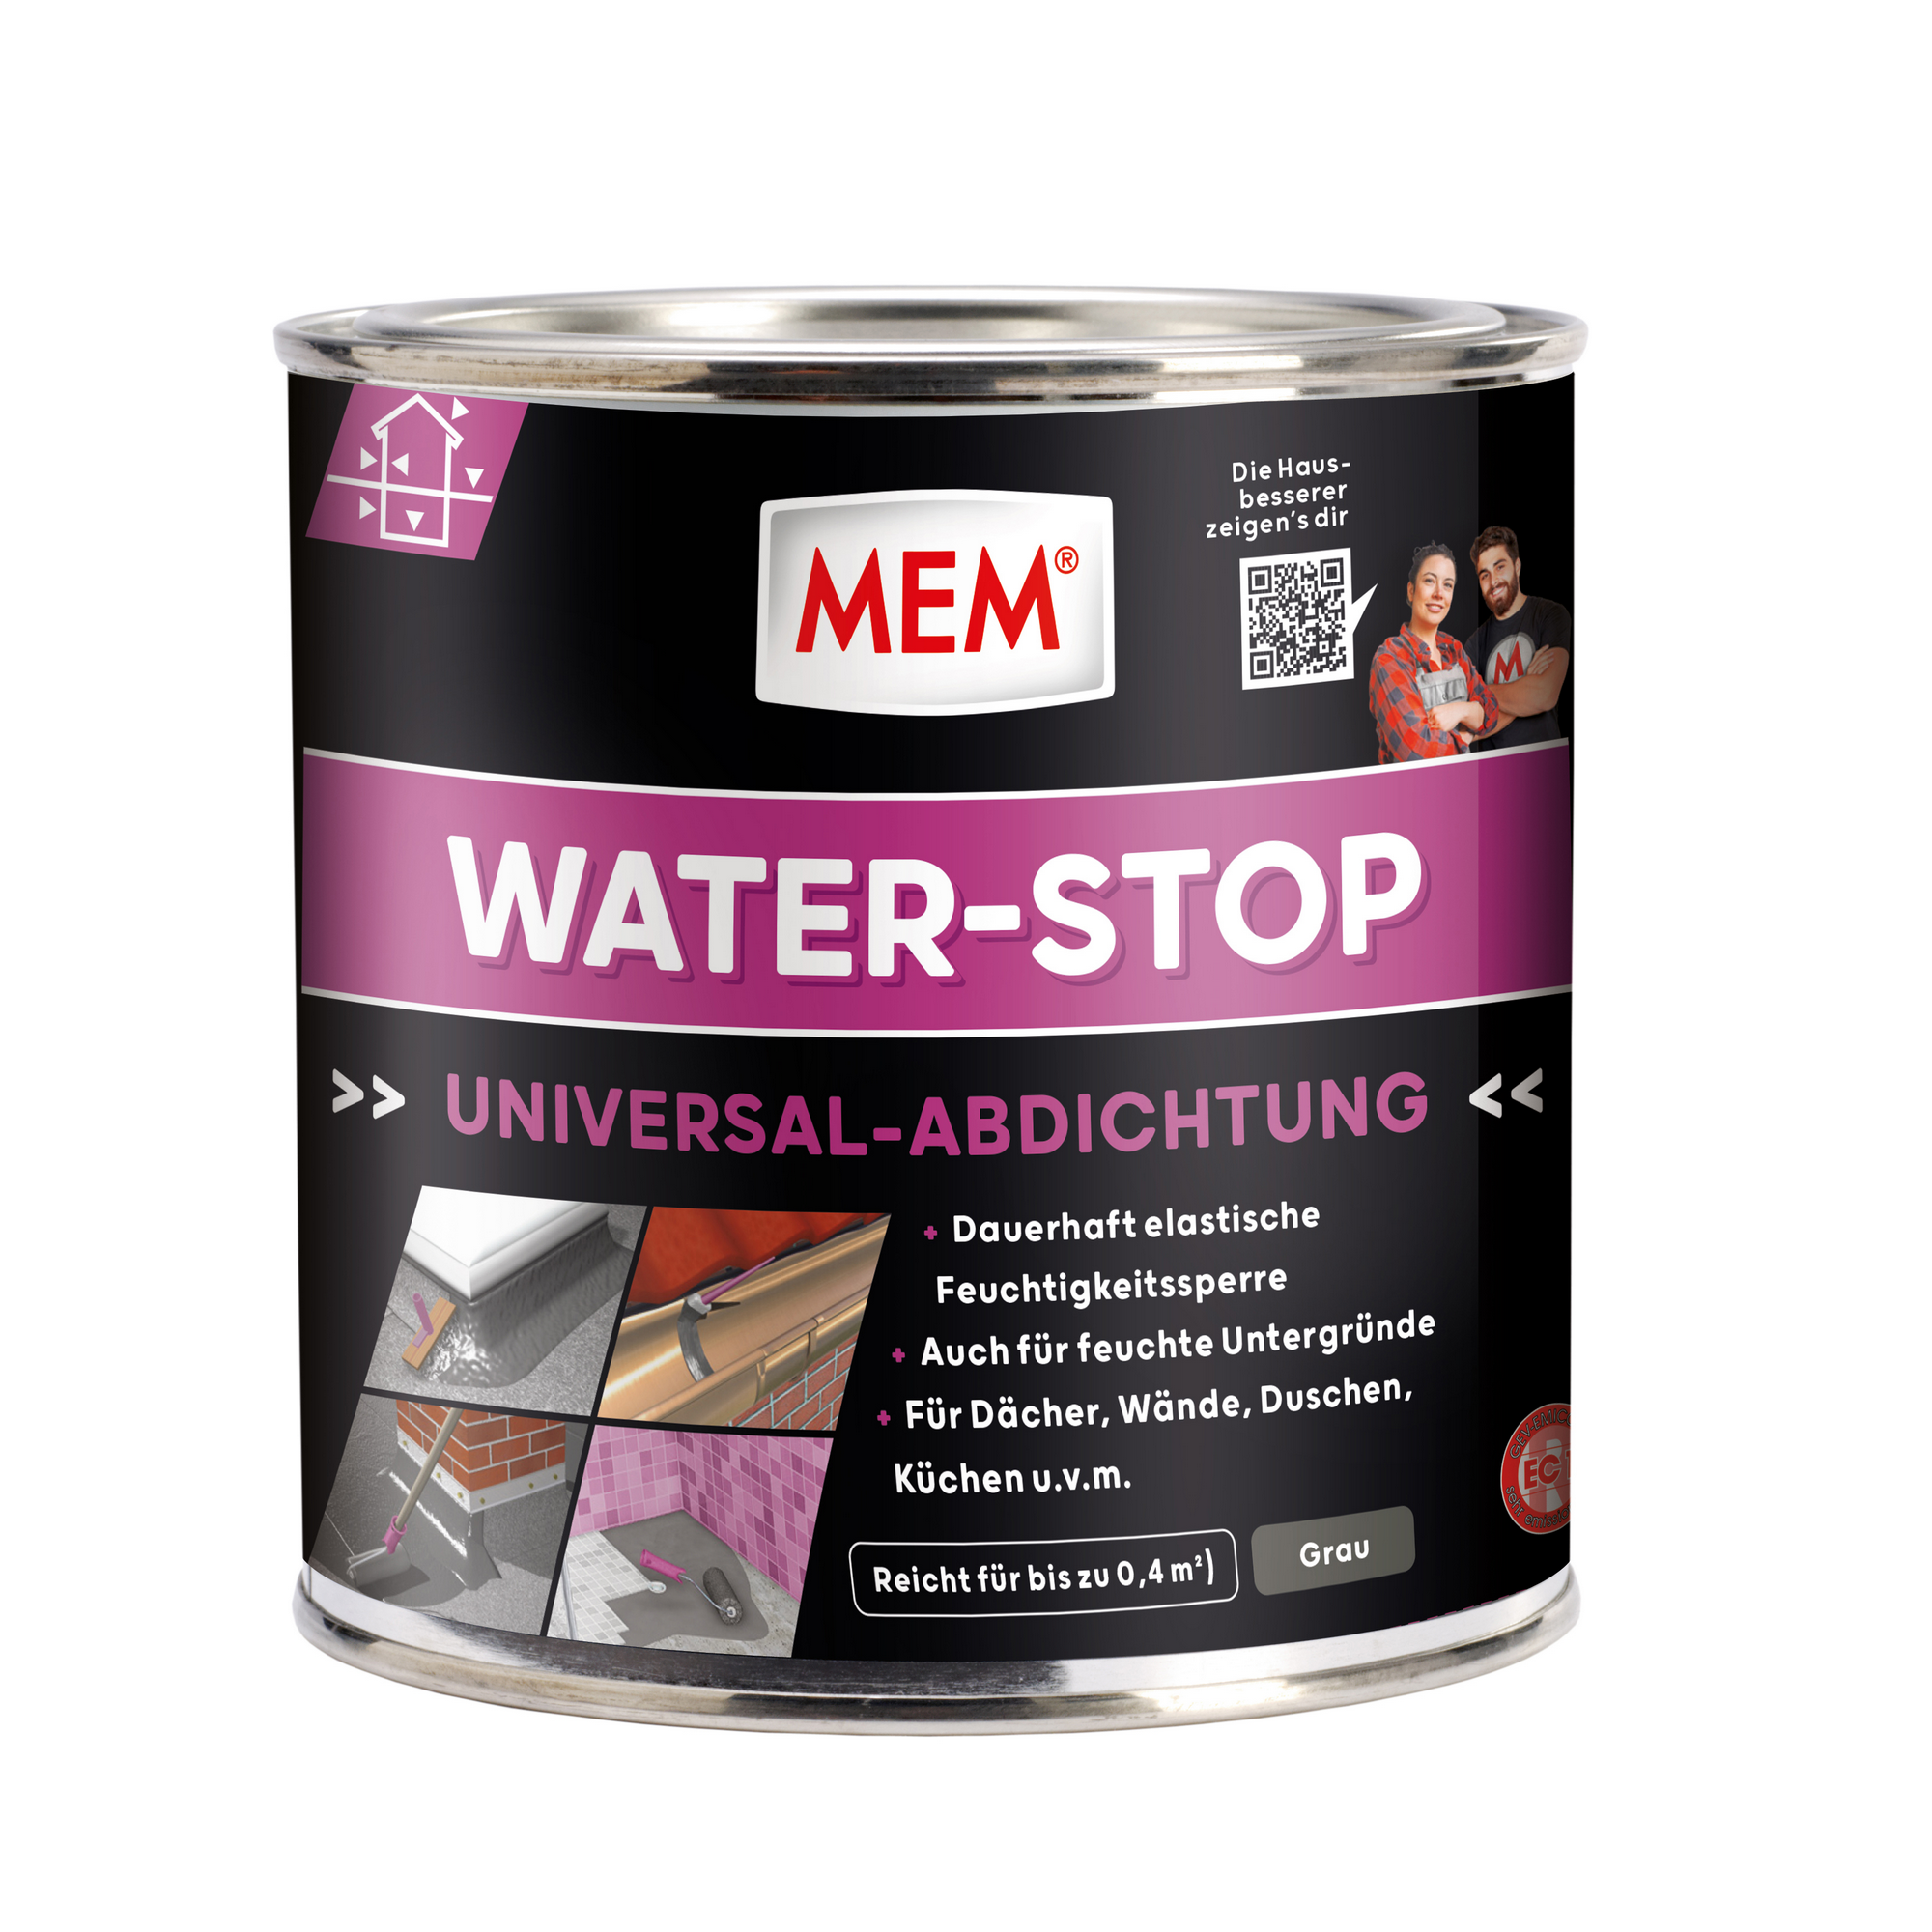 Universal-Abdichtung 'Water-Stop' 1 kg + product picture